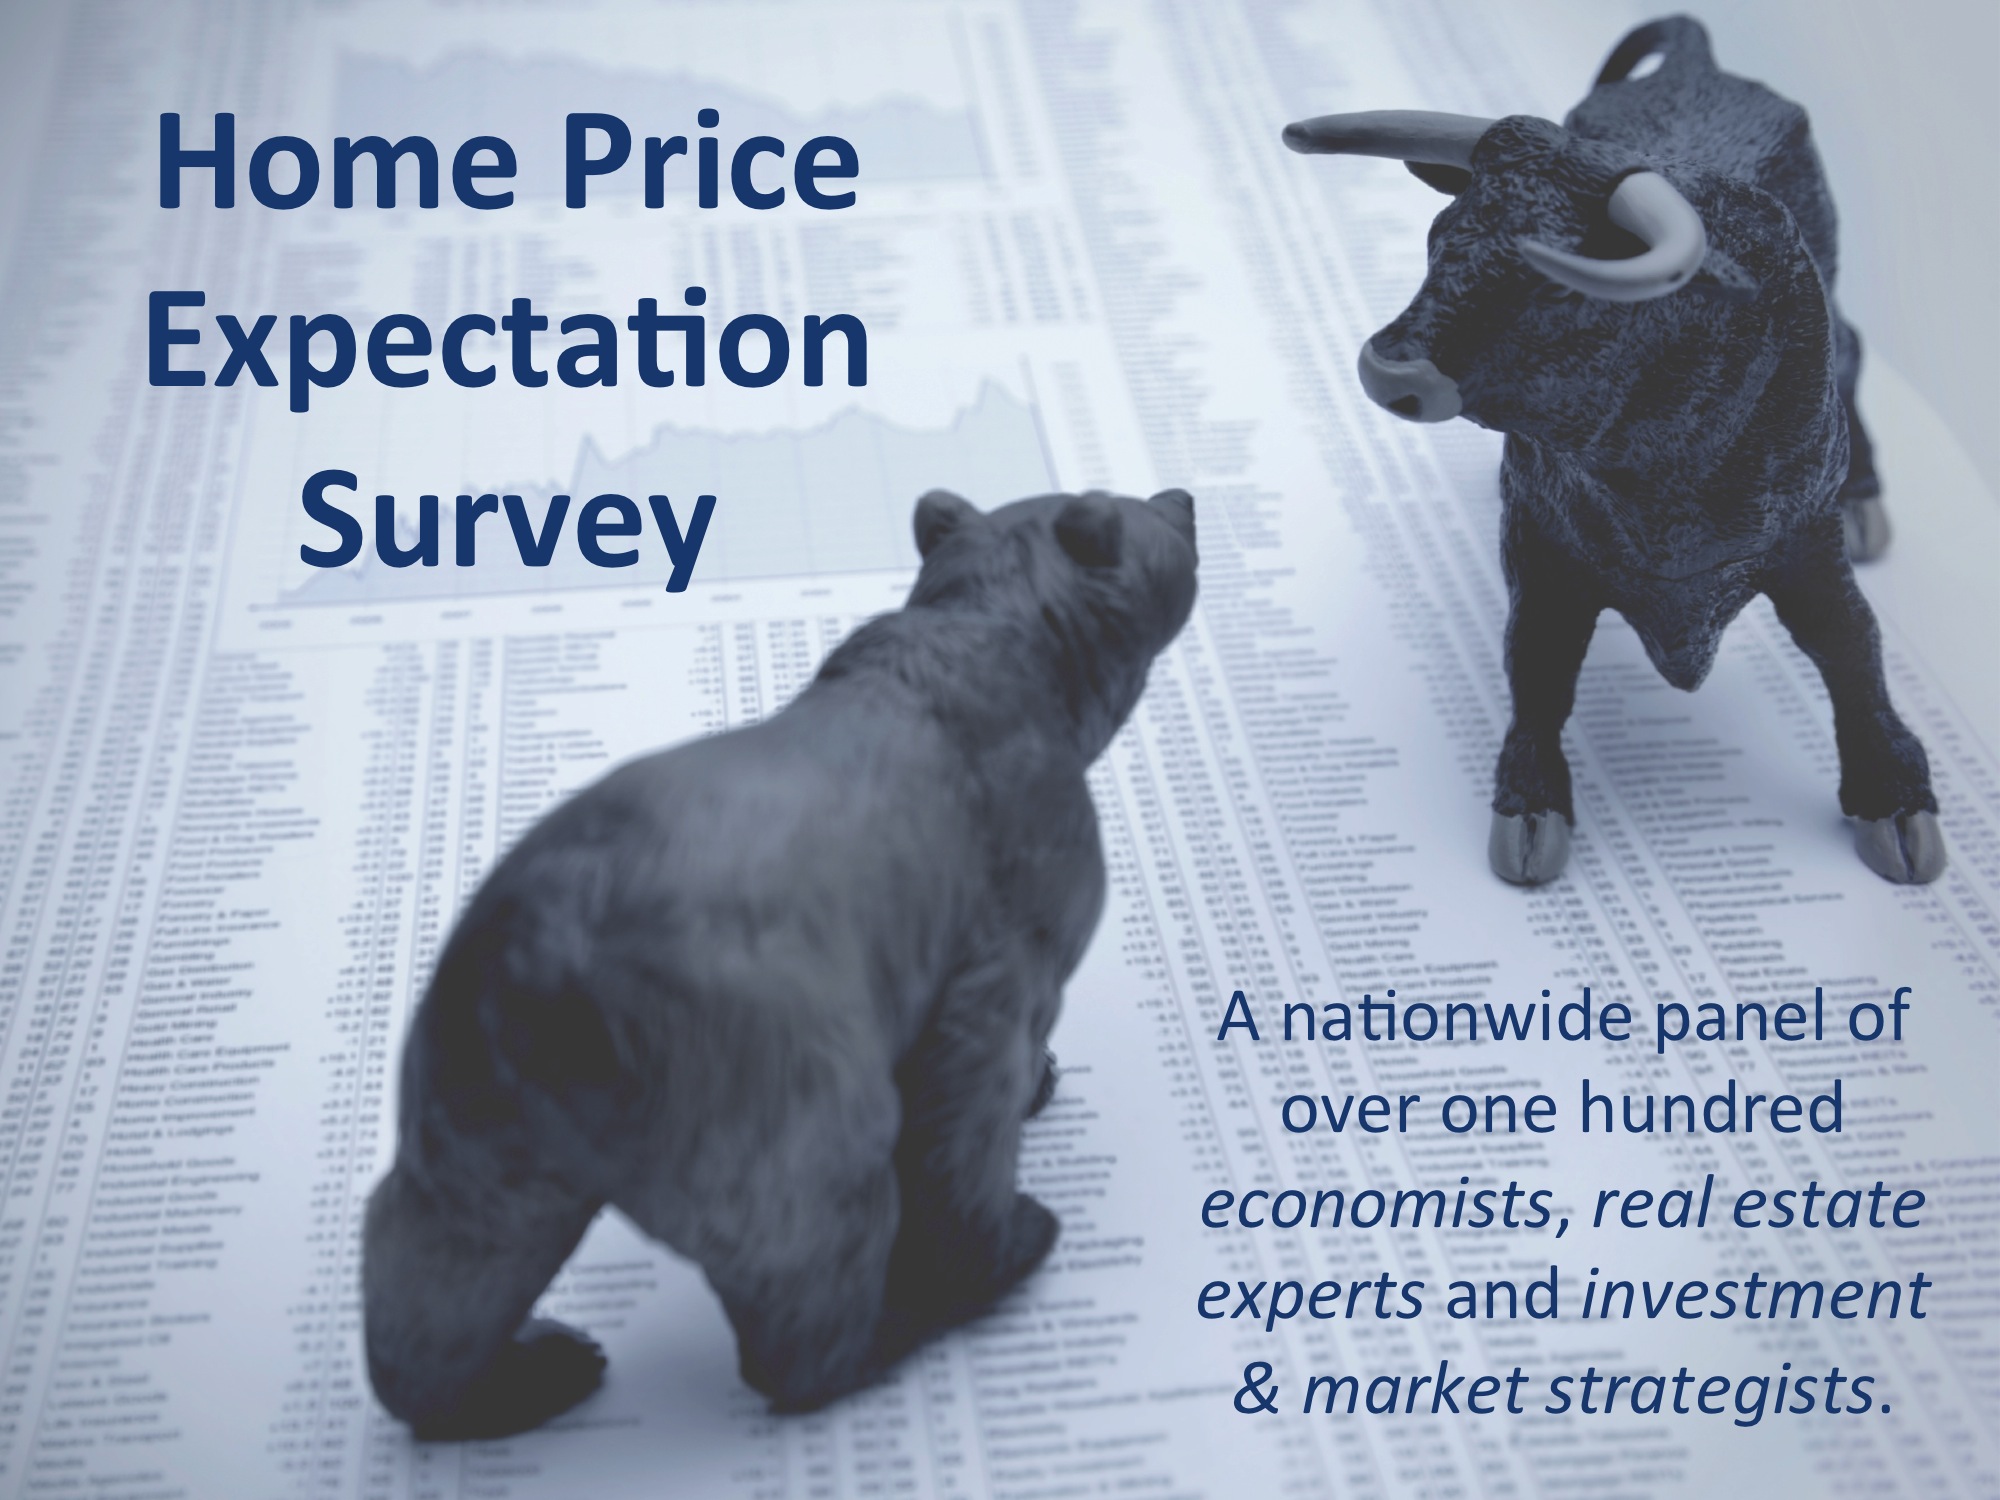 Home Price Expectation Survey Slides Available!